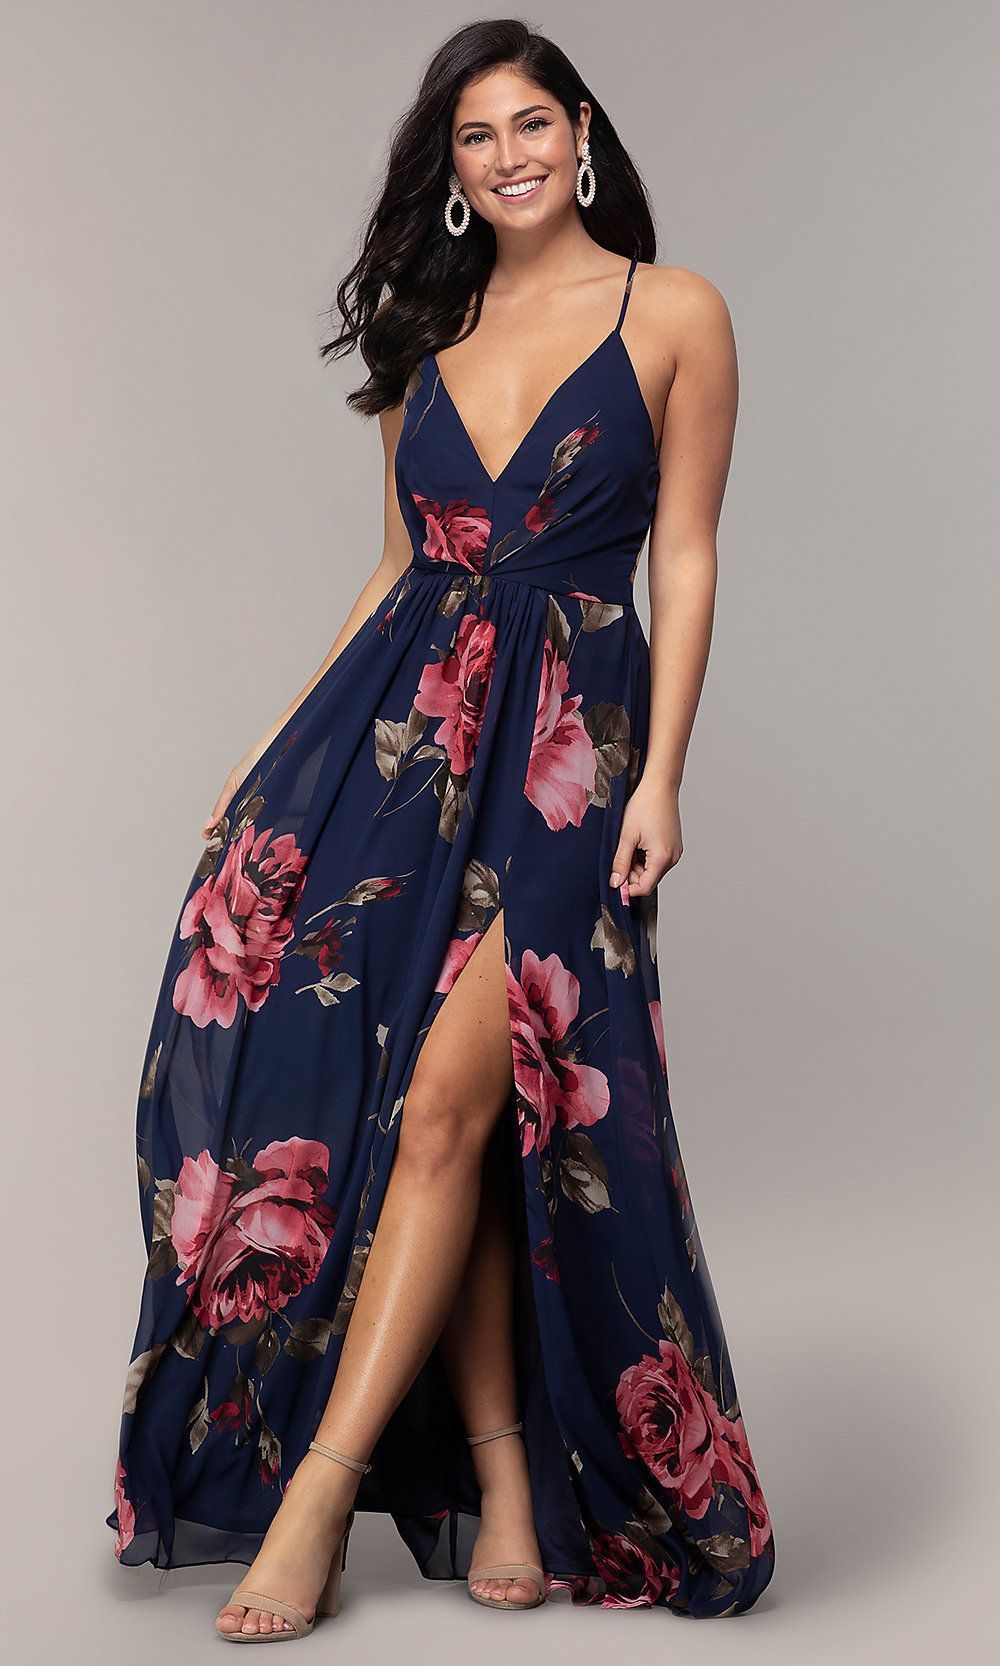 Floral-Print Long V-Neck Prom Dress by Simply -   17 dress Simple floral ideas